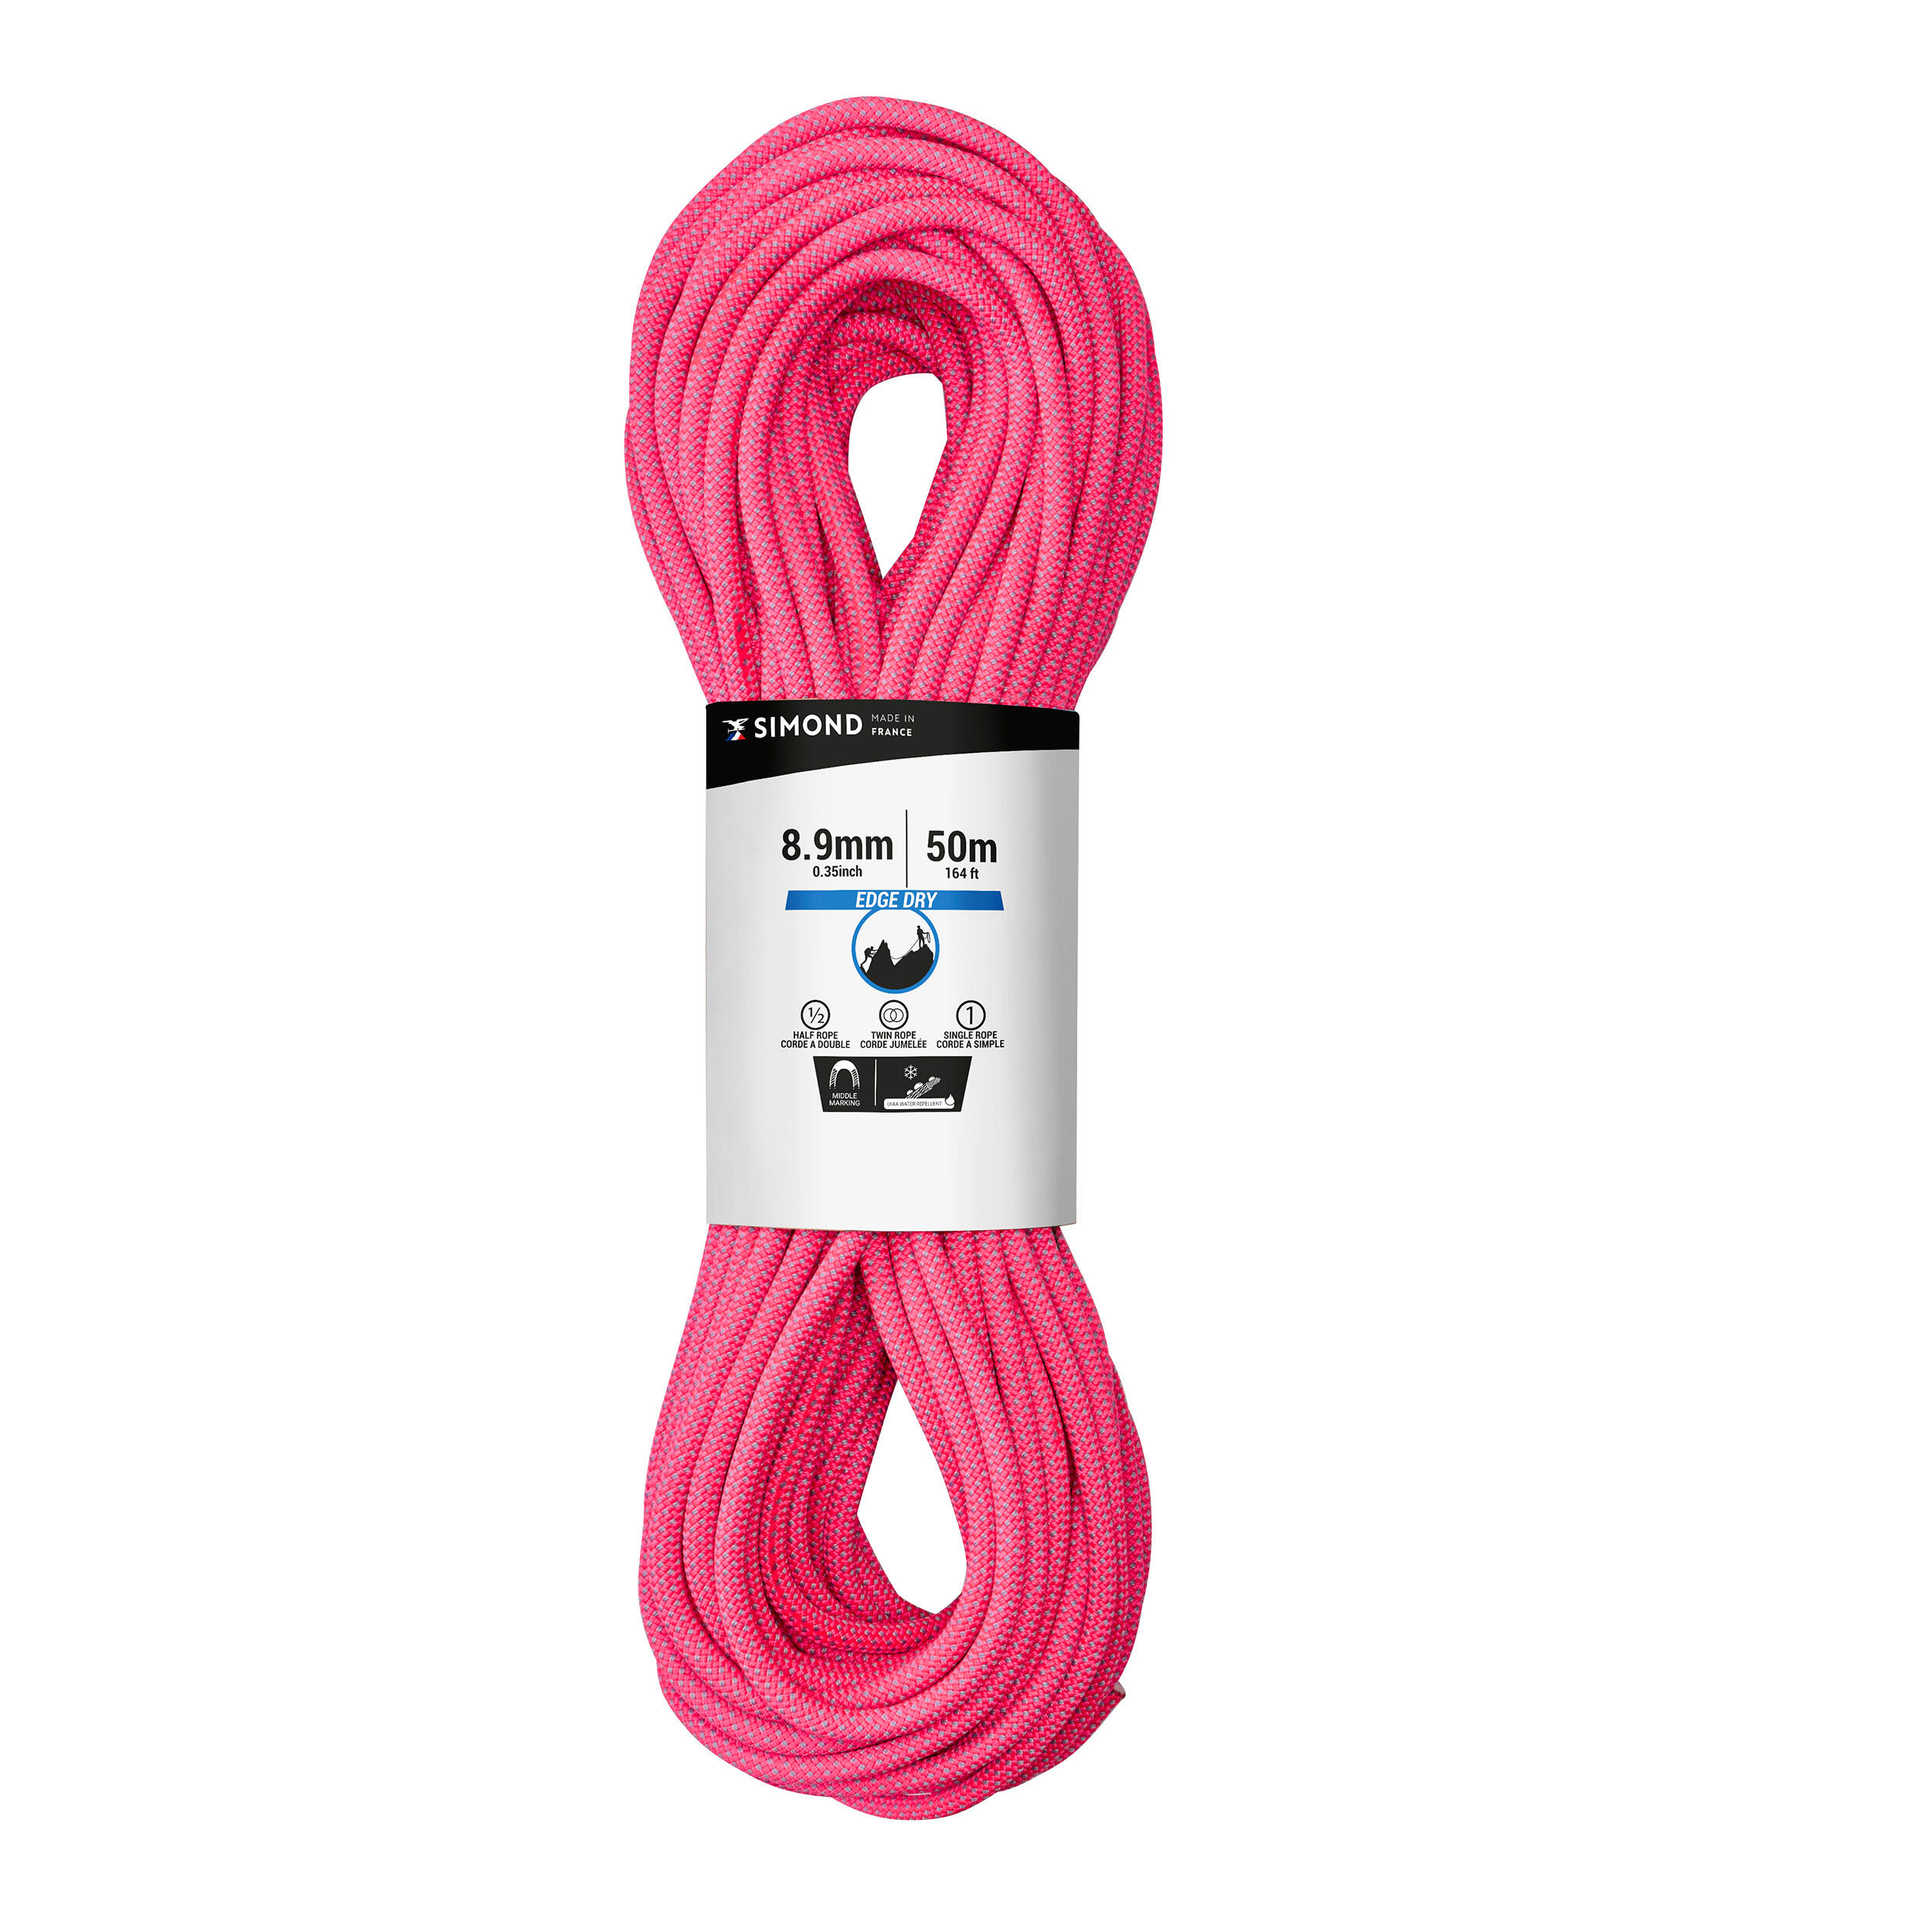 TRIPLE DRY ROPE STANDARD FOR CLIMBING AND MOUNTAINEERING 8.9mmx50m-EDGE DRY  ROSE SIMOND